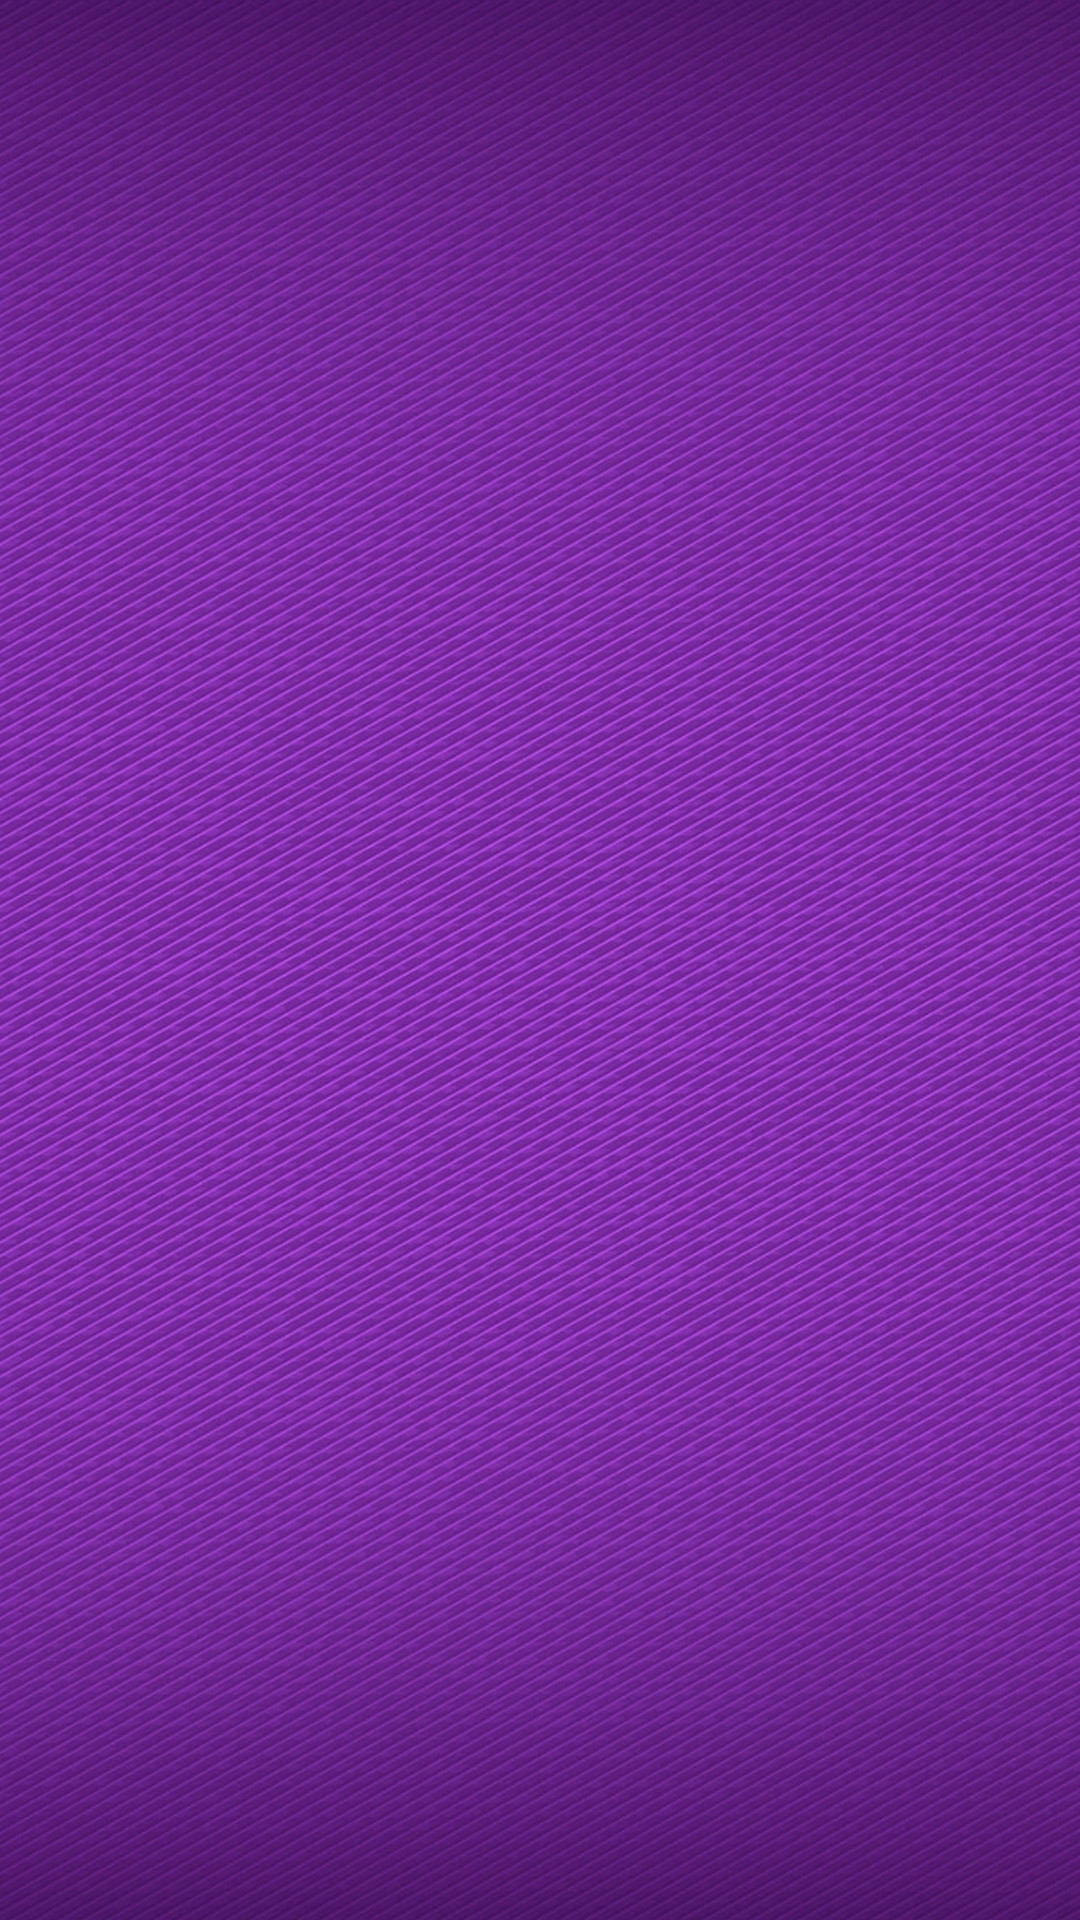 Cool Purple i Phones Wallpaper with high-resolution 1080x1920 pixel. Download all Mobile Wallpapers and Use them as wallpapers for your iPhone, Tablet, iPad, Android and other mobile devices